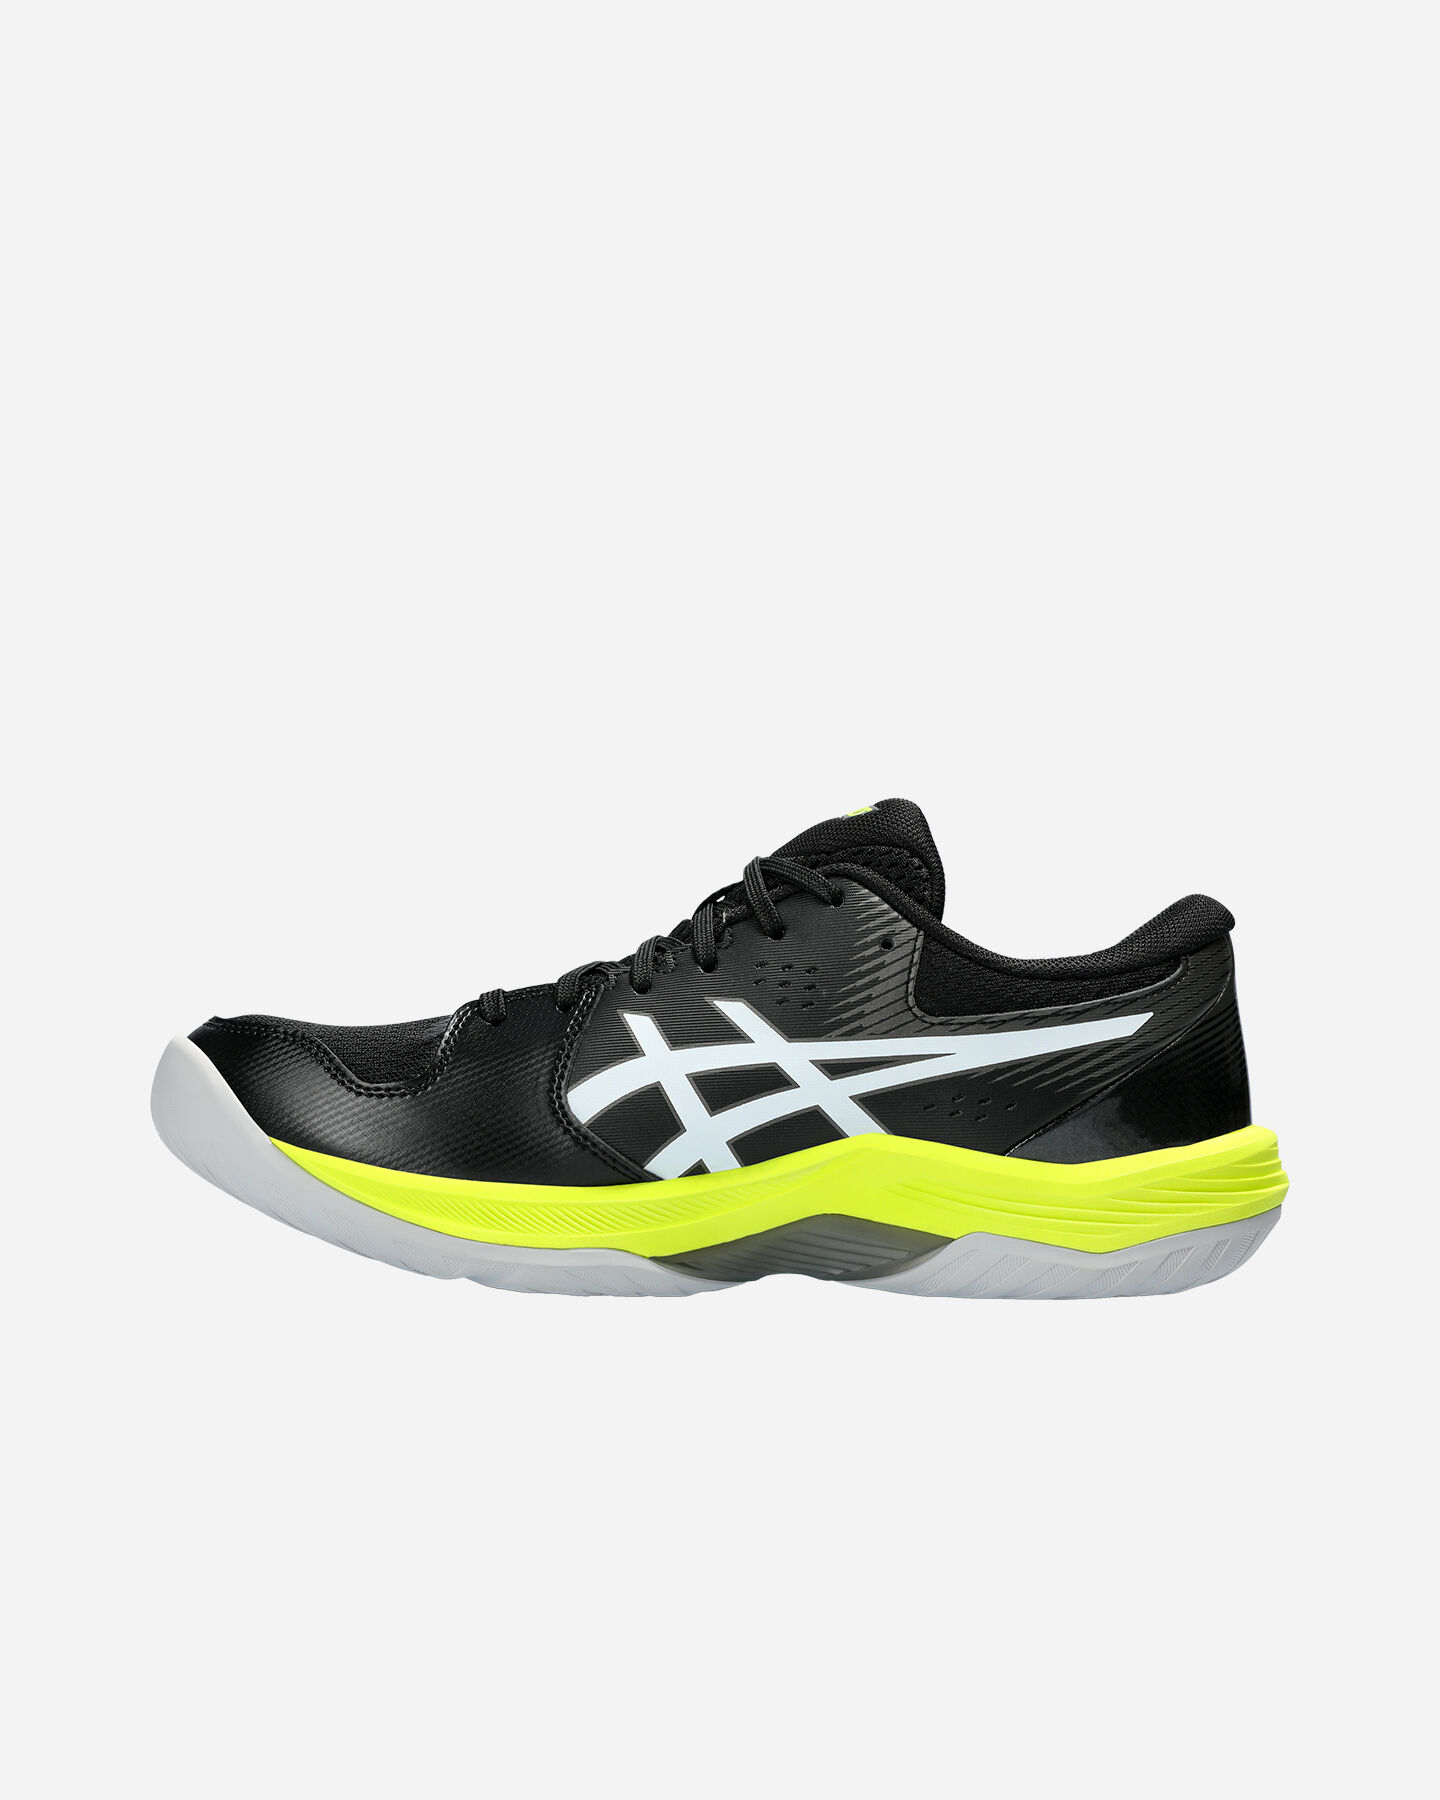  Scarpe volley ASICS BEYOND M S5585380|001|8 scatto 5